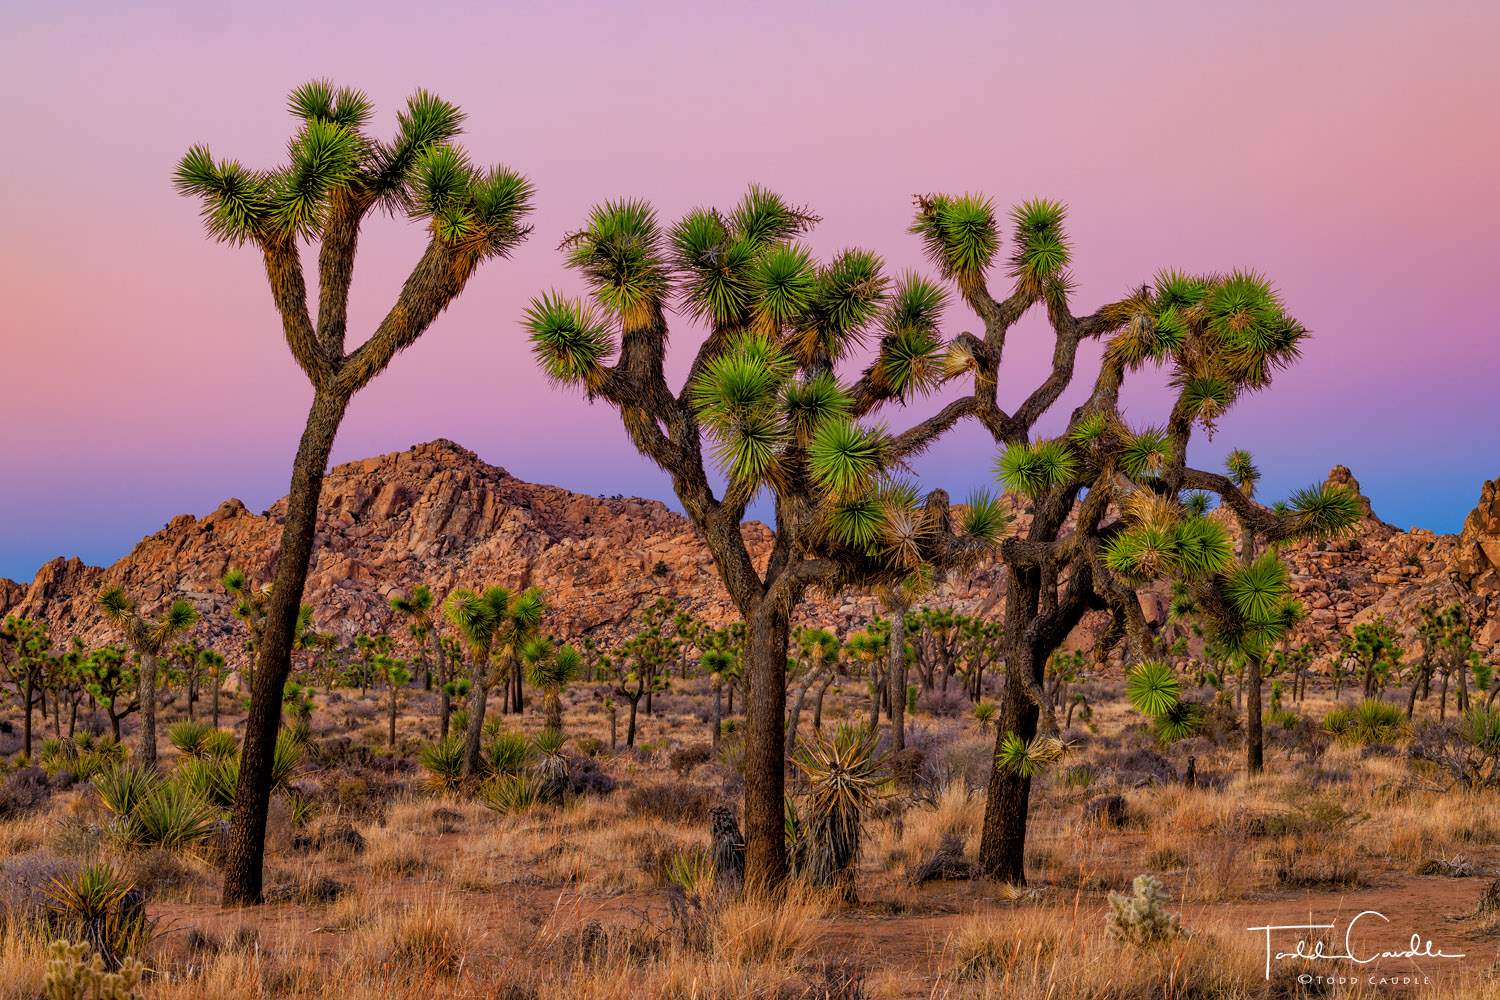 Joshua trees stand at attention as a colorful Earth shadow climbs above the horizon after sunset.